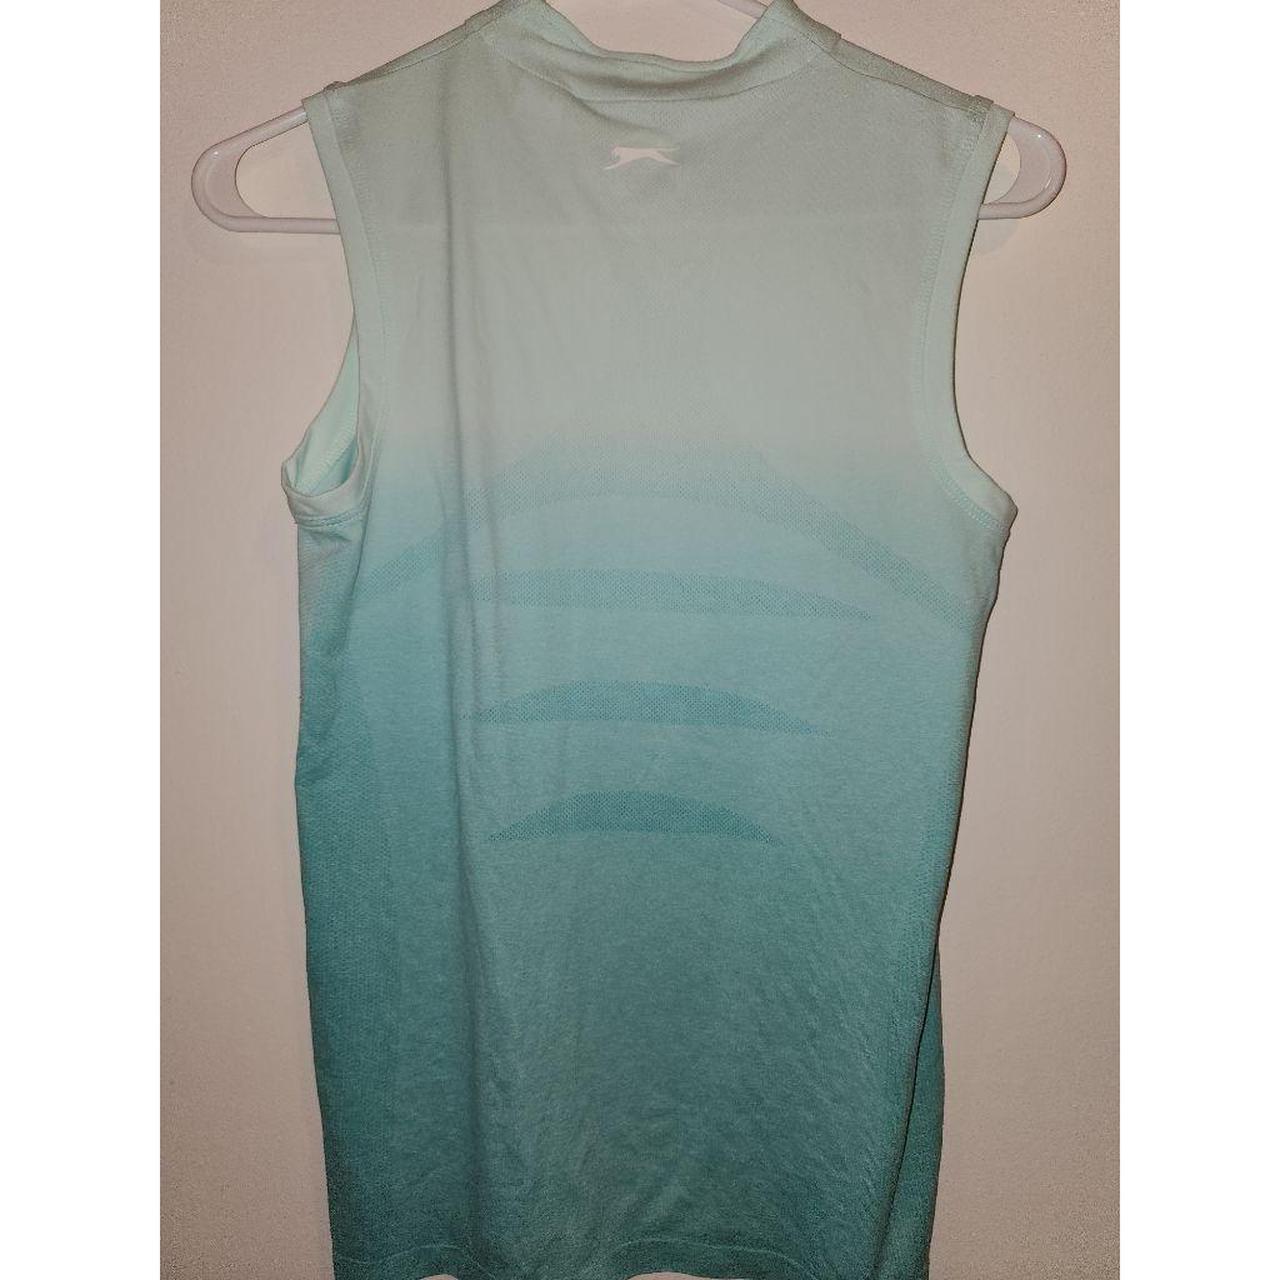 Product Image 4 - Small
Collar tank
Golf Tank
Ombre teal

65% Nylon
35%